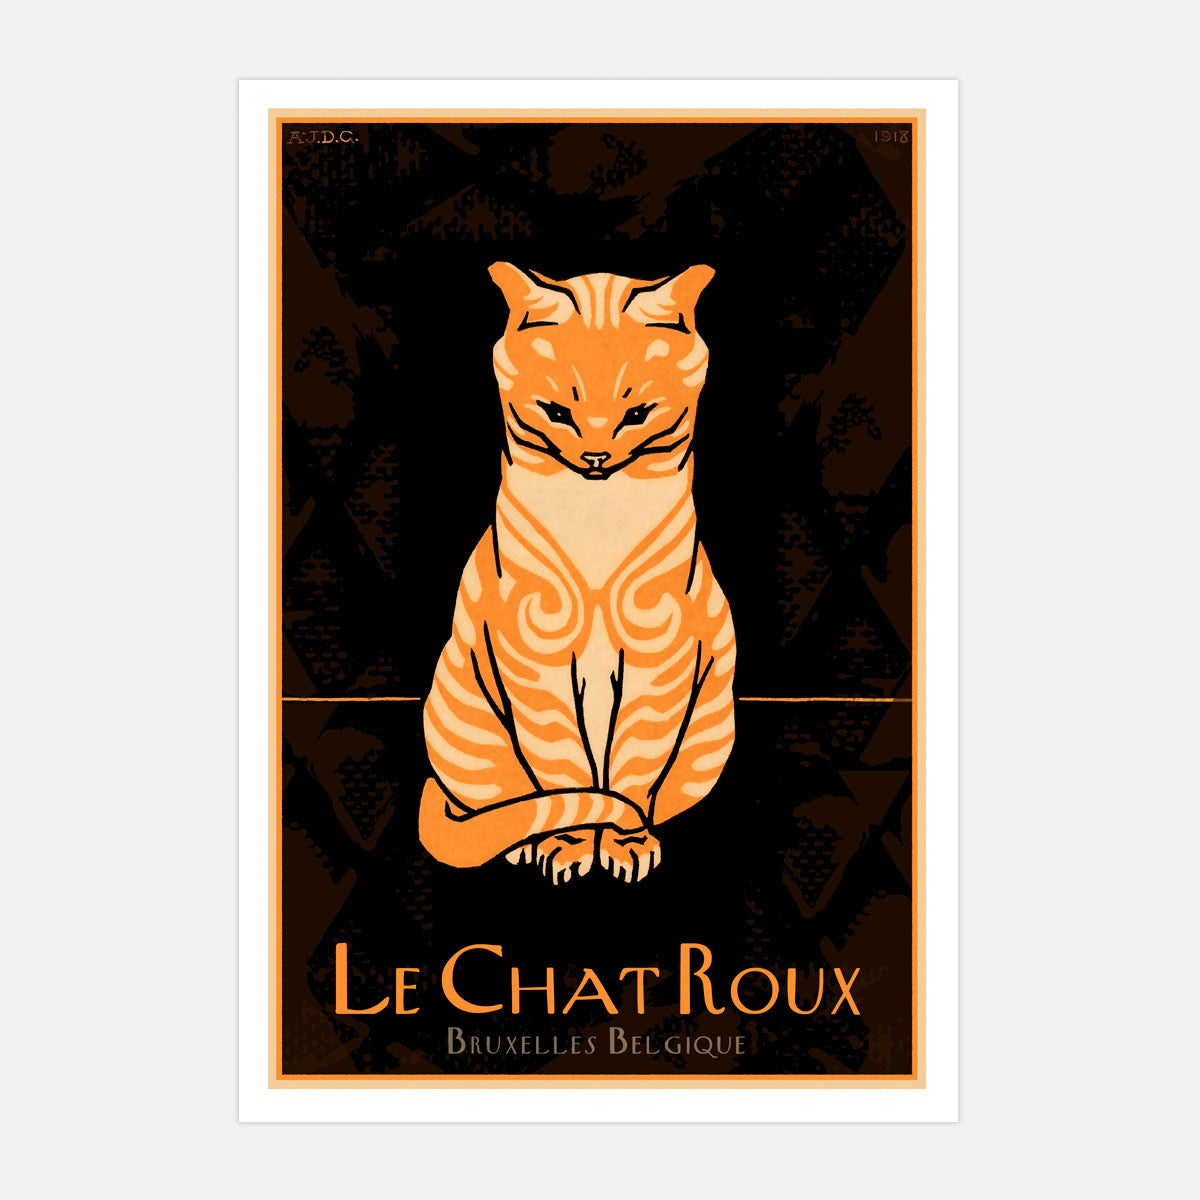 Le Chat Roux vintage retro poster from Places We Luv